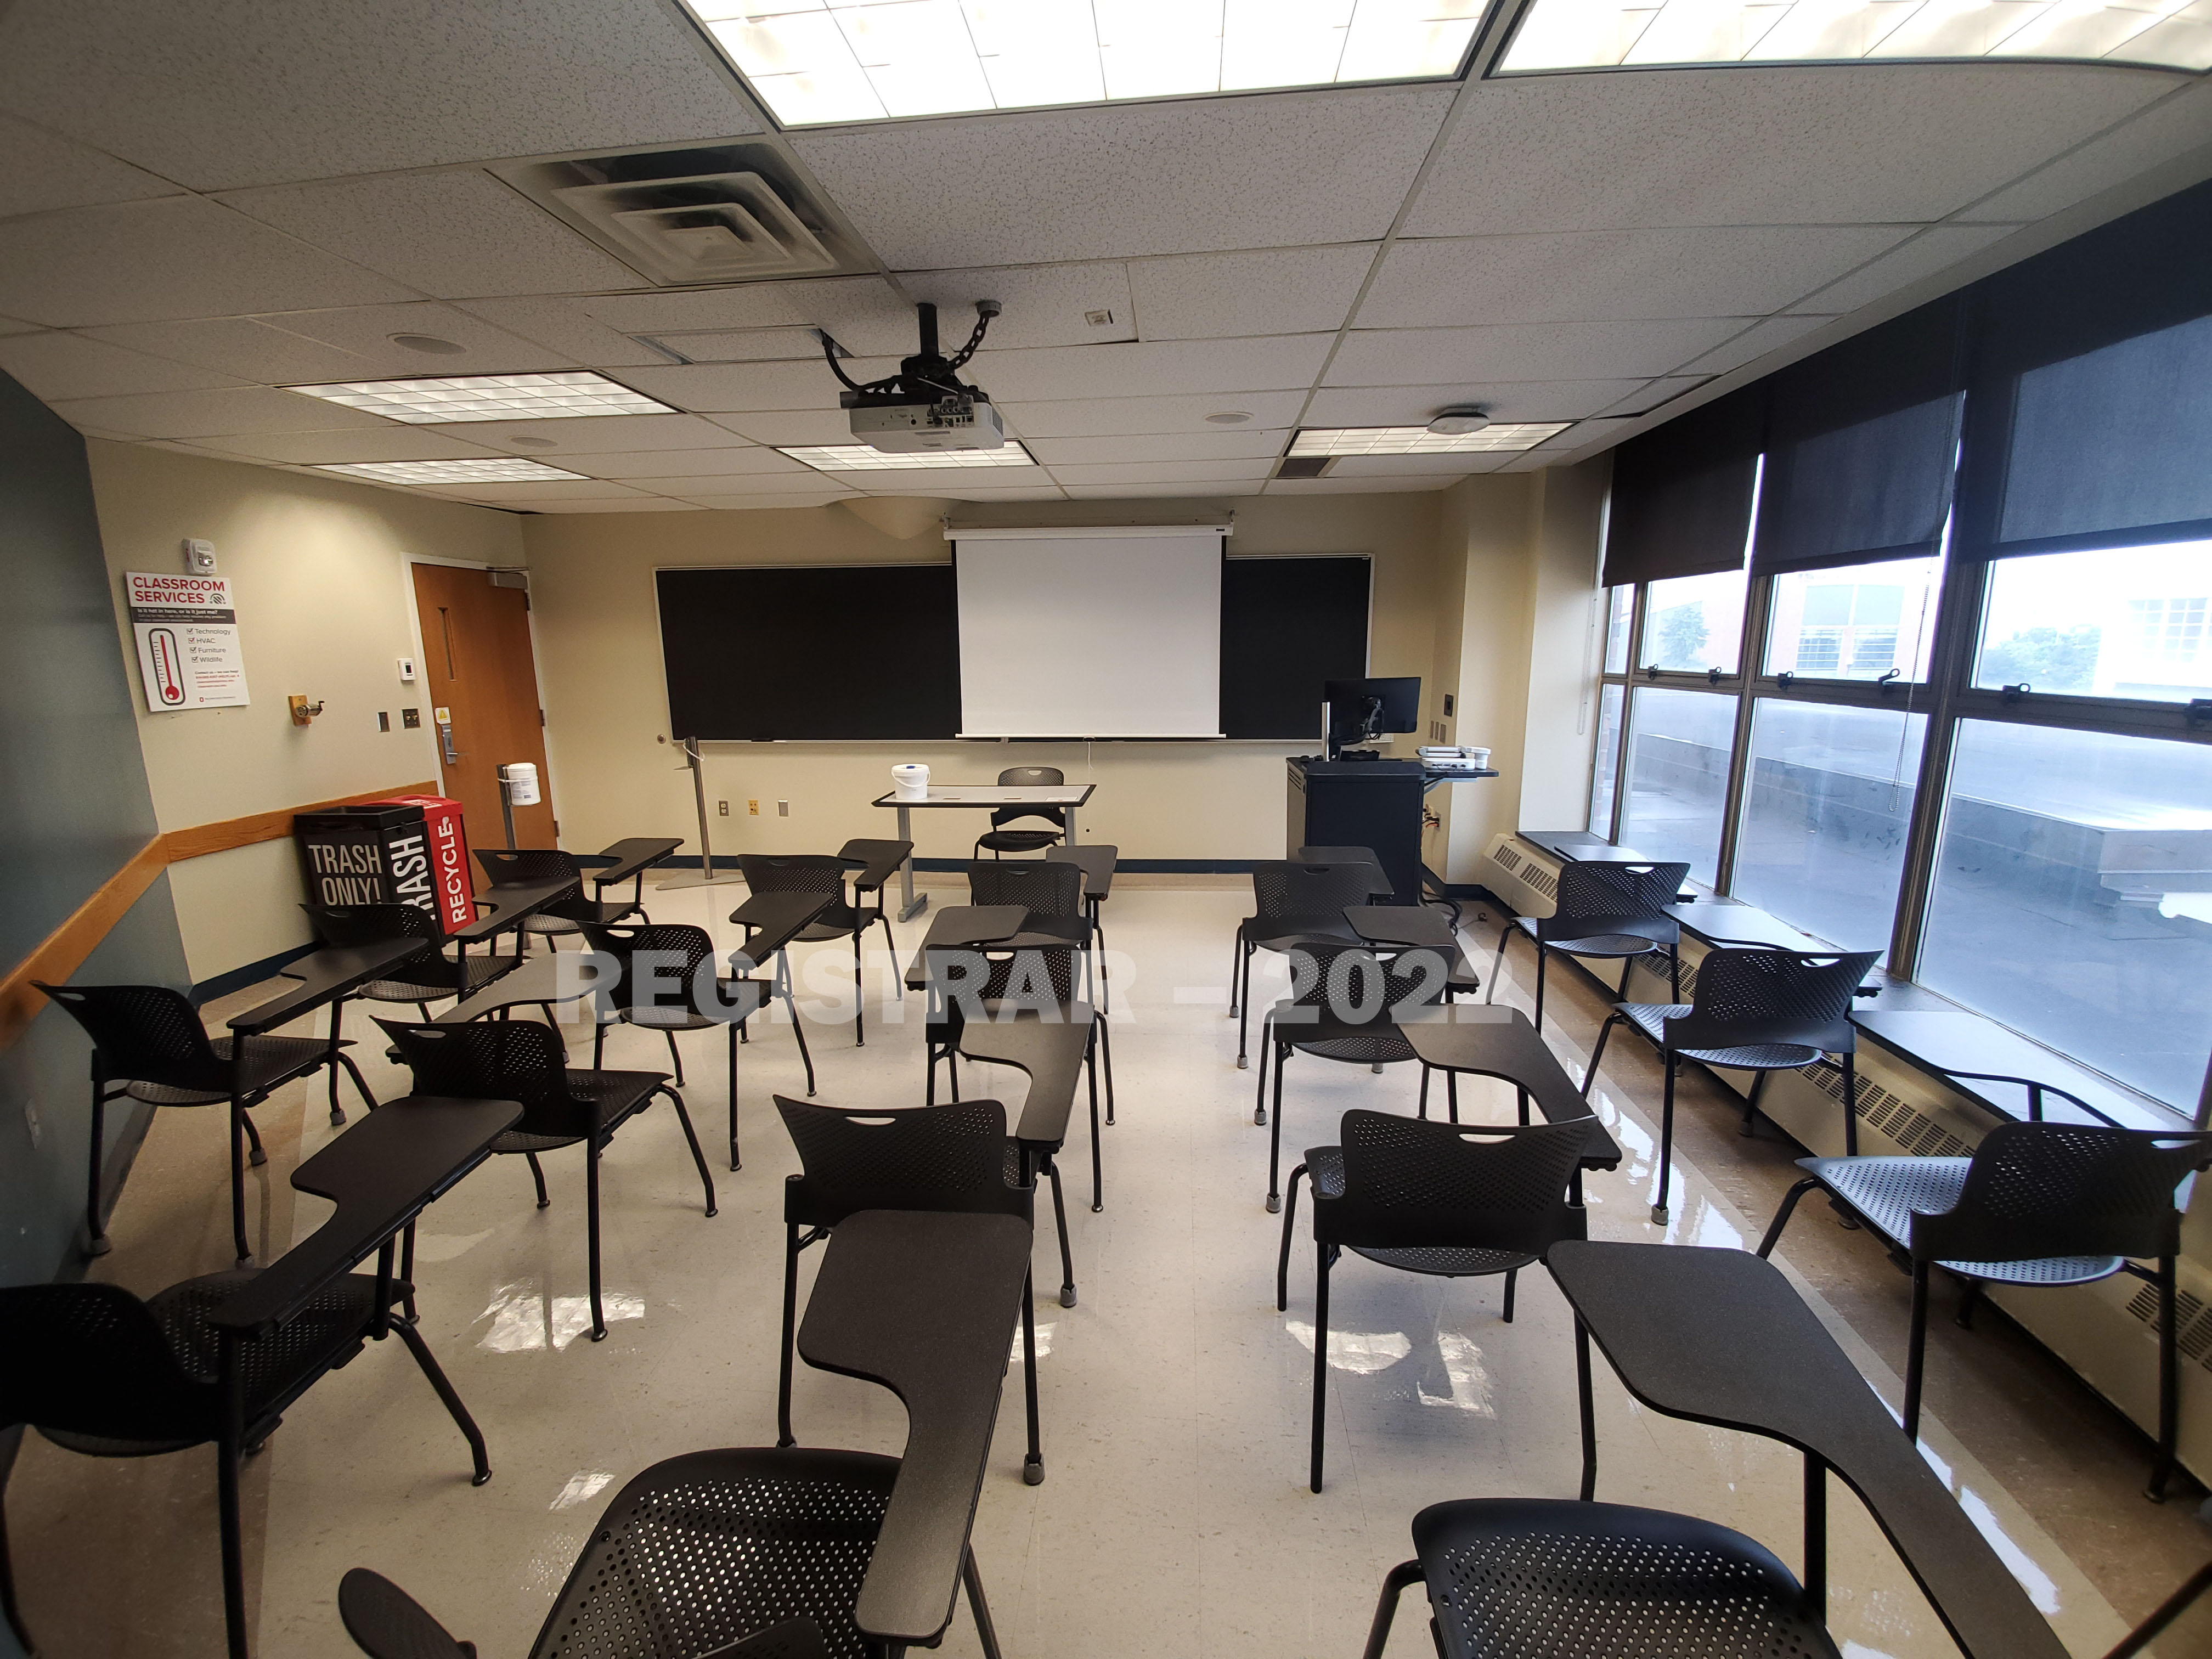 Enarson Classroom Building room 238 ultra wide angle view from the back of the room with projector screen down